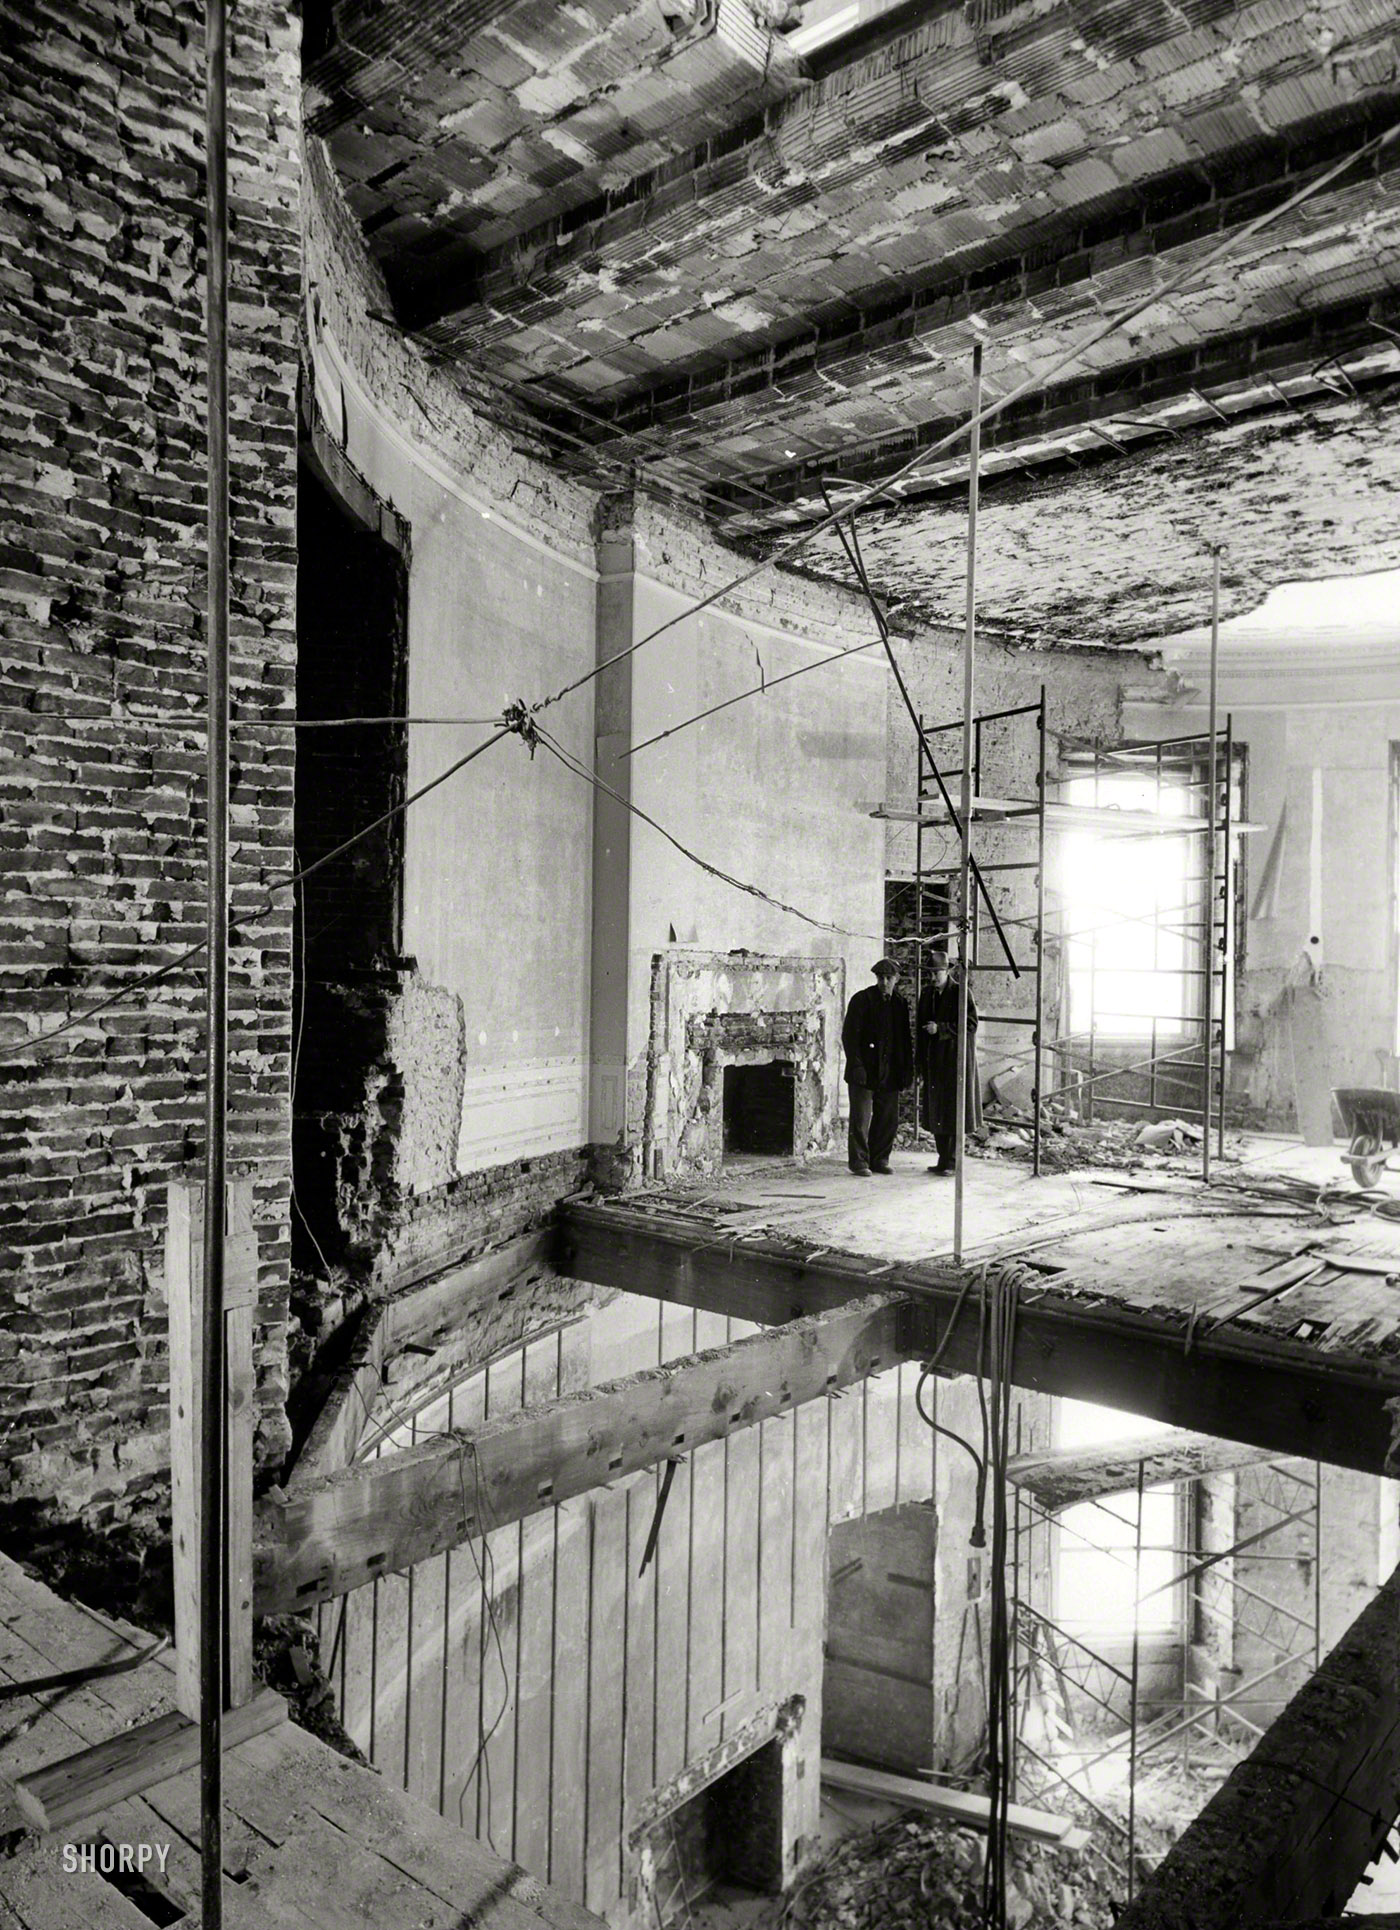 March 9, 1950. Washington, D.C . "White House renovation. Second floor Oval Study above Blue Room. North wall and part of floor removed for installation of steel shoring columns." Photo by Abbie Rowe. View full size.